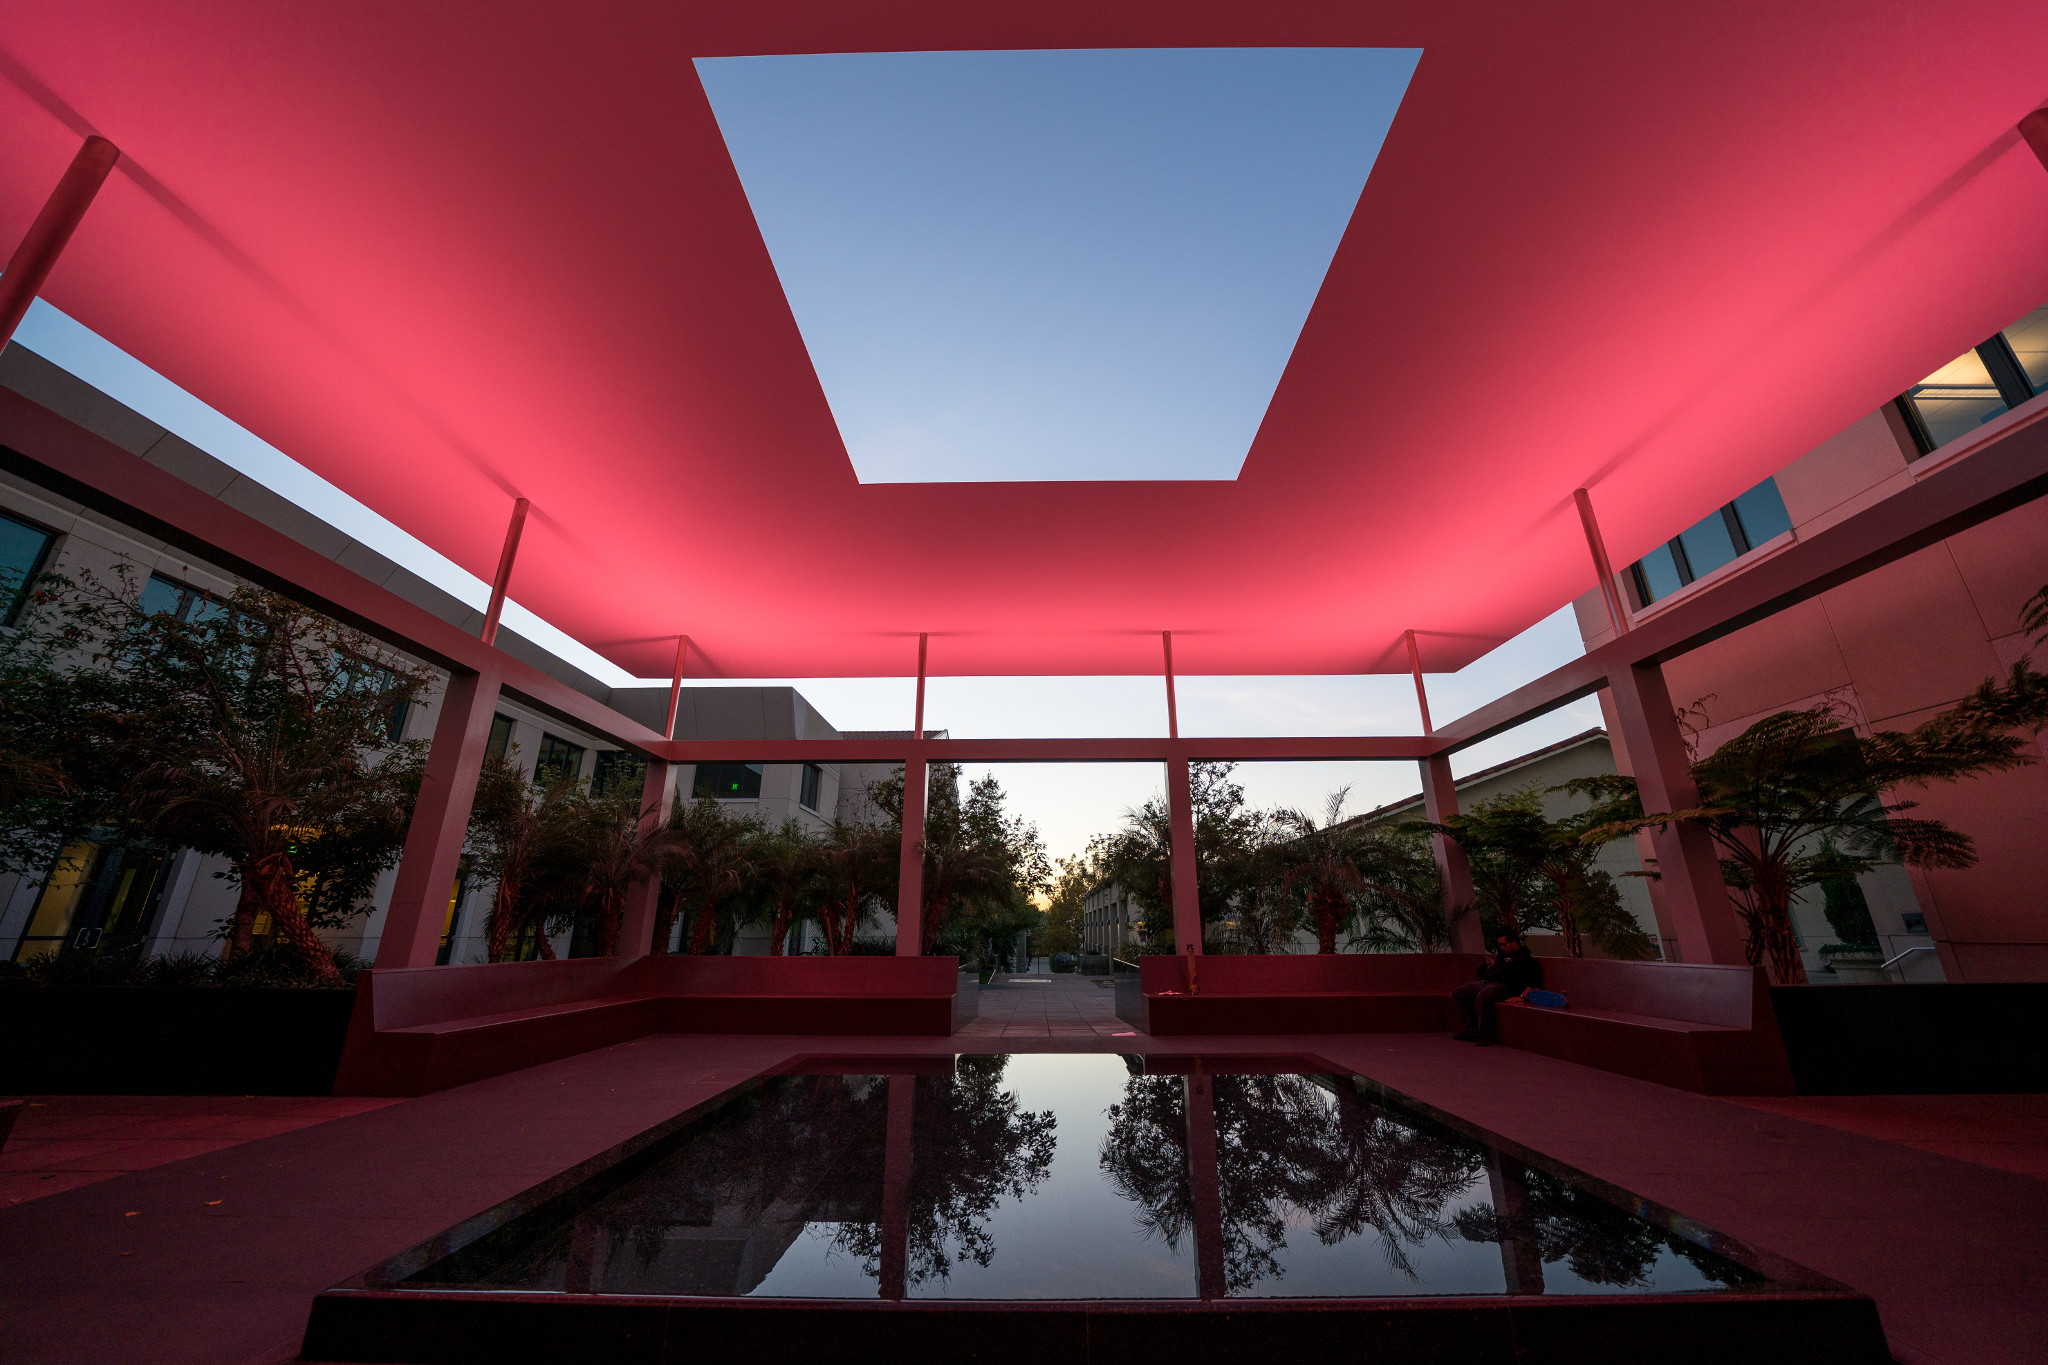 An art exhibition featuring a reflective pool and glowing red light.